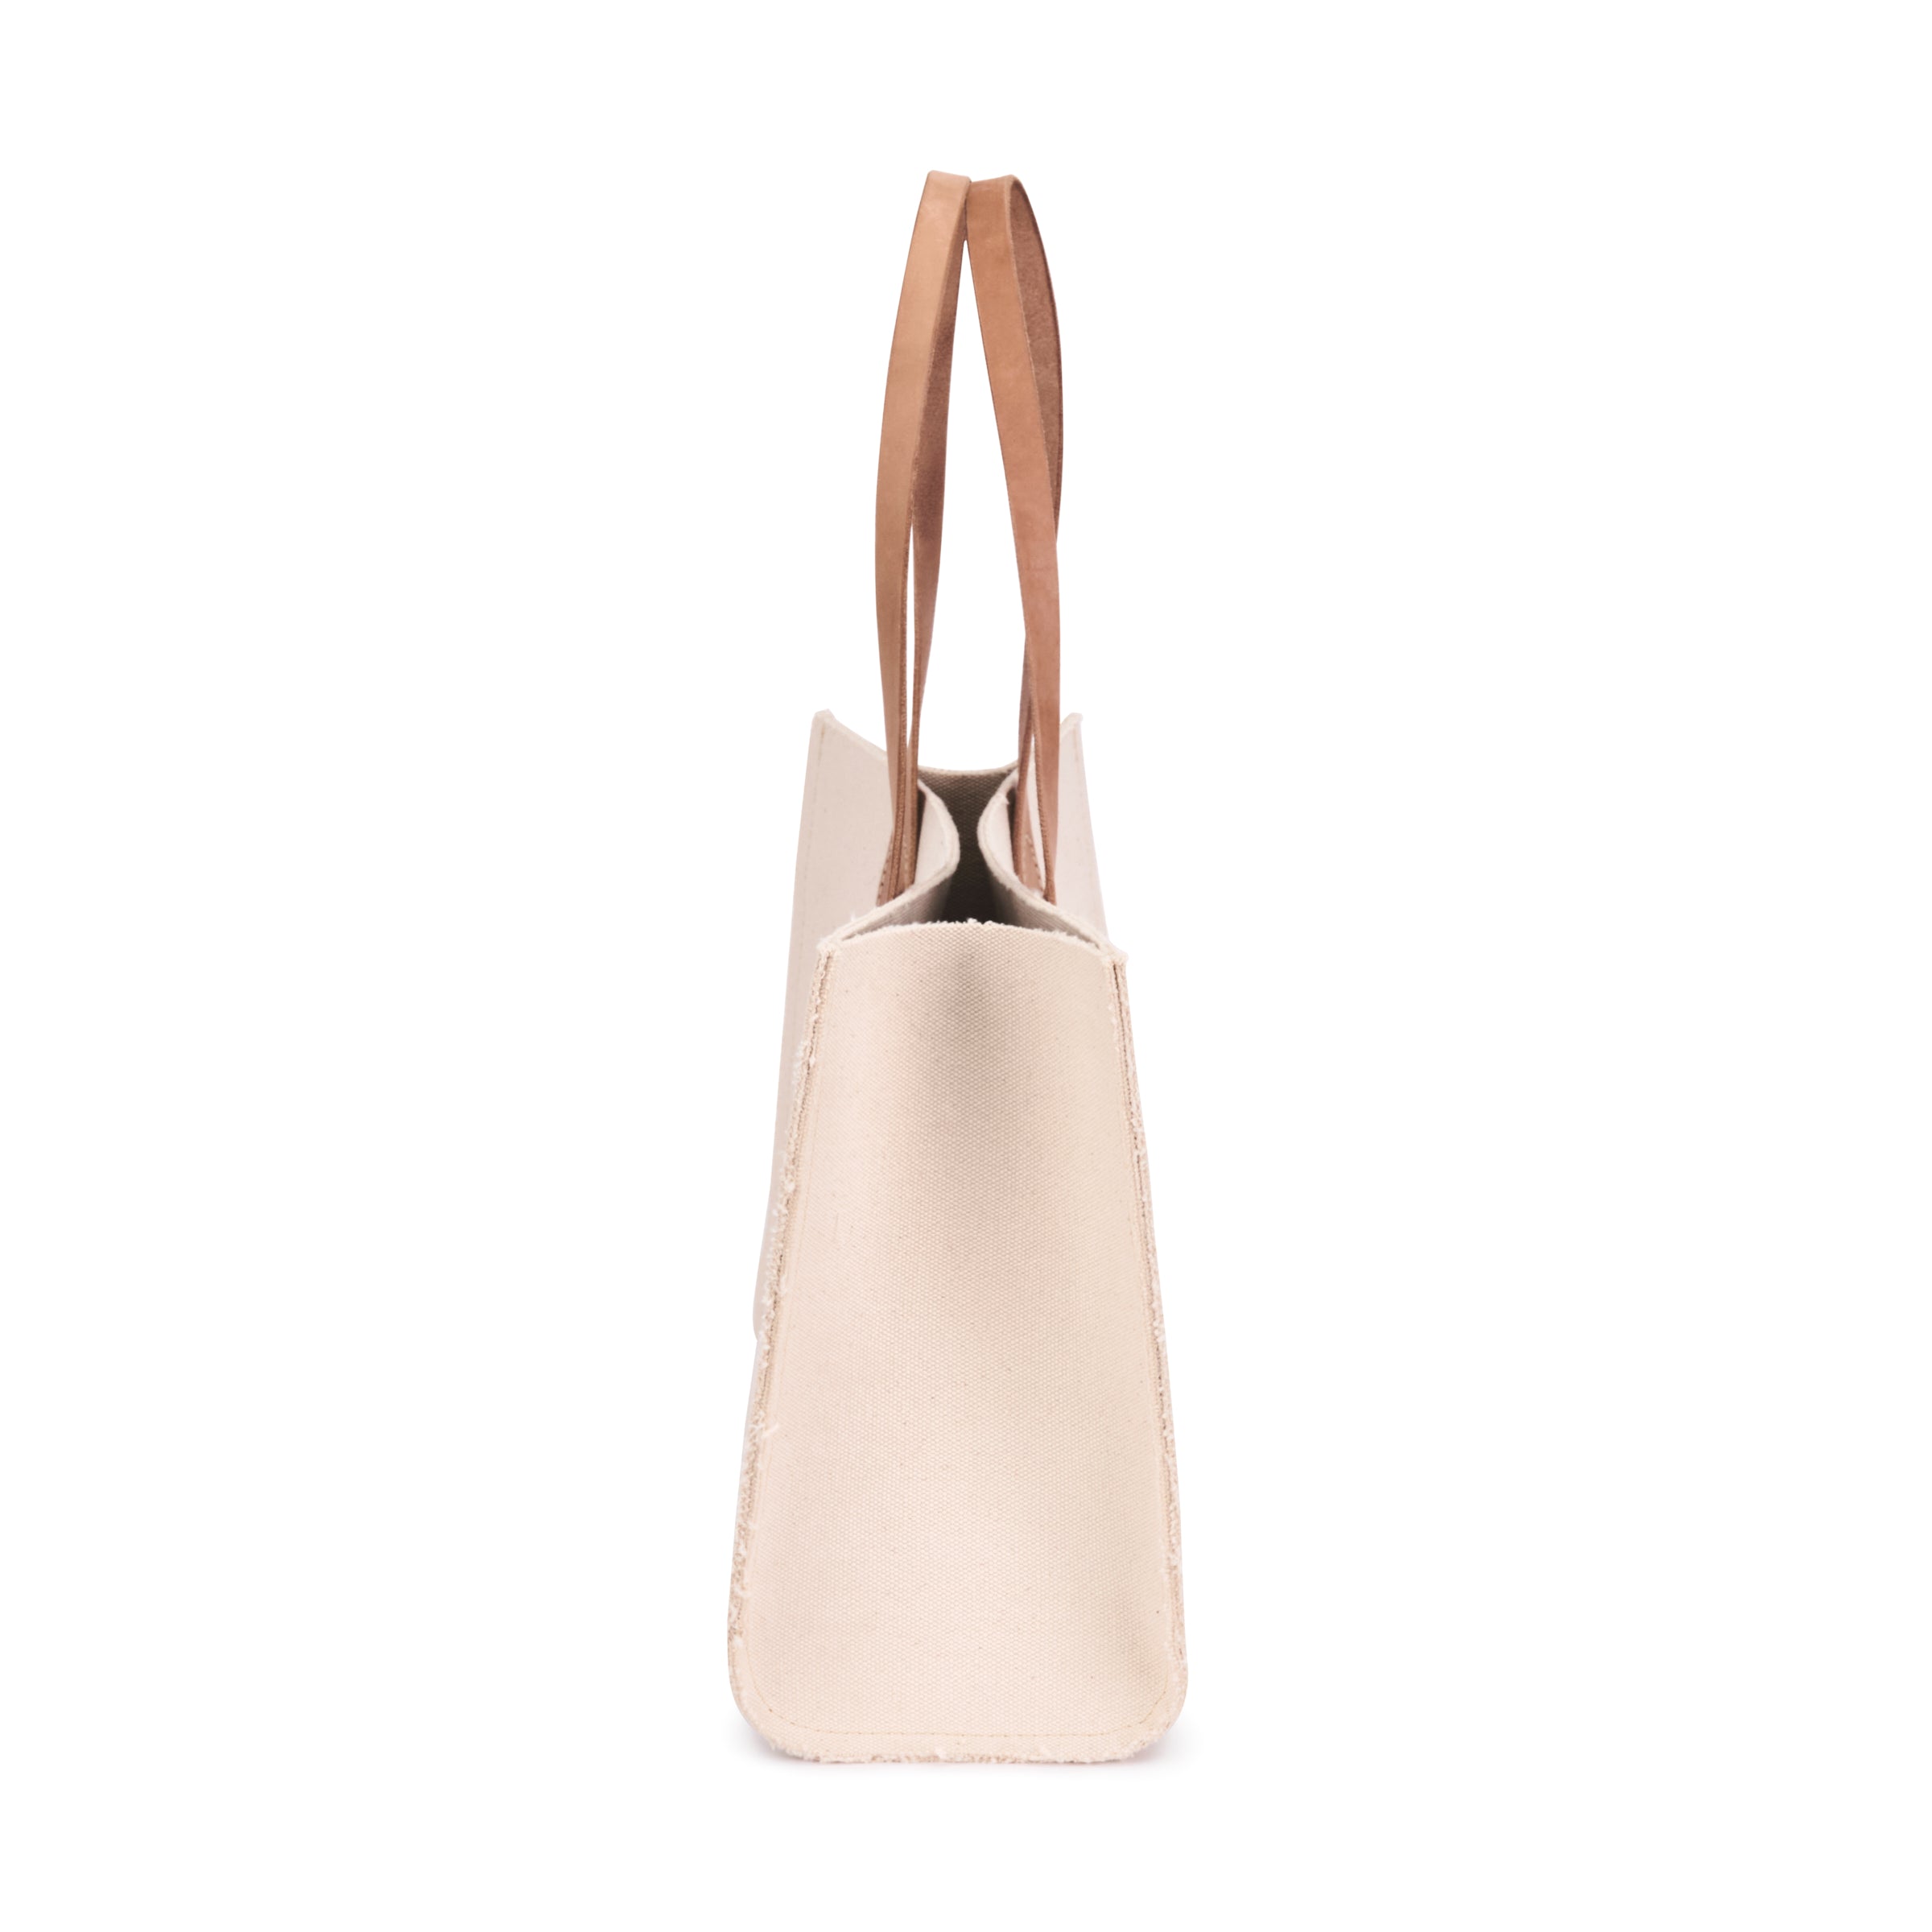 A side view of the Ava Canvas Tote in Beige by Ezra Arthur